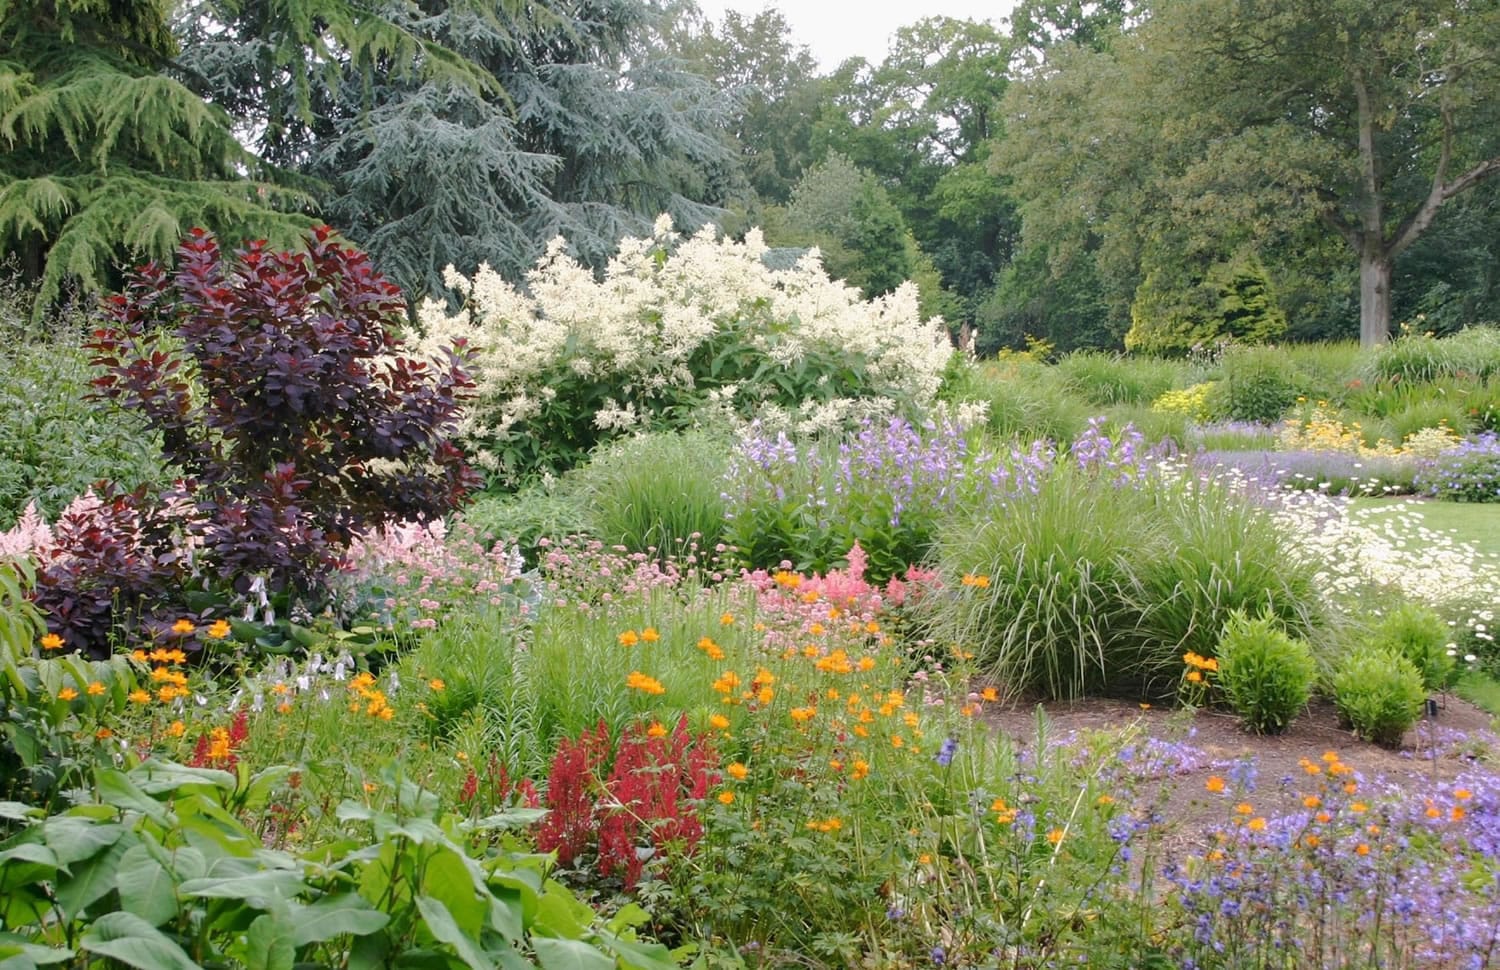 The late summer garden begins to take on tones of autumn in the ever-changing garden.